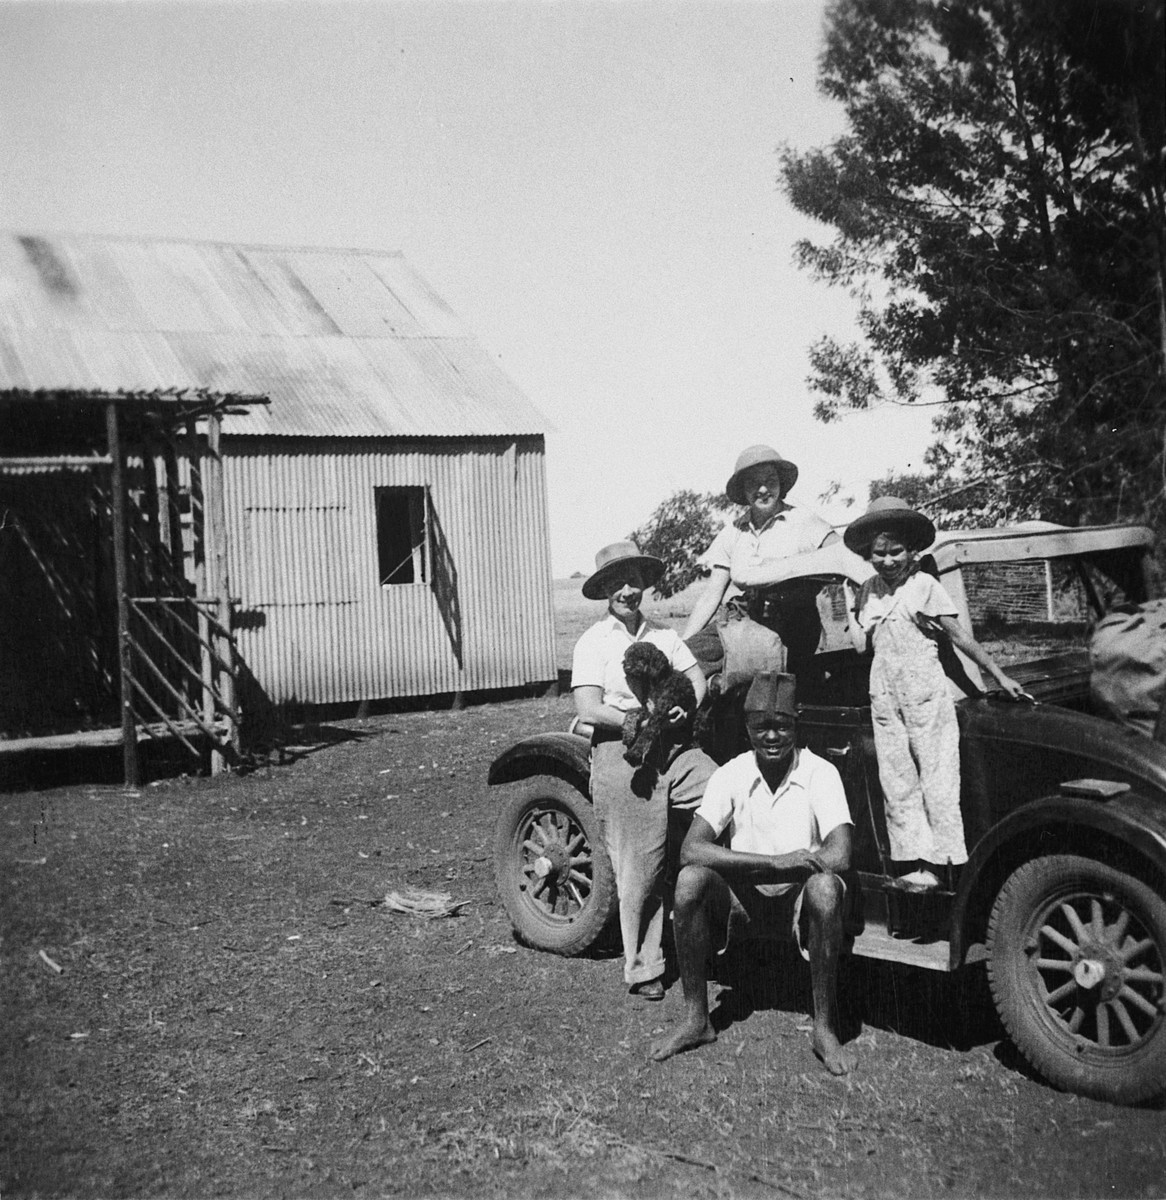 Members of a Jewish refugee family pose with an African assistant in front of their car on their farm in Kenya.

Pictured are members of the Zweig family.  Stefanie Zweig is on the right.